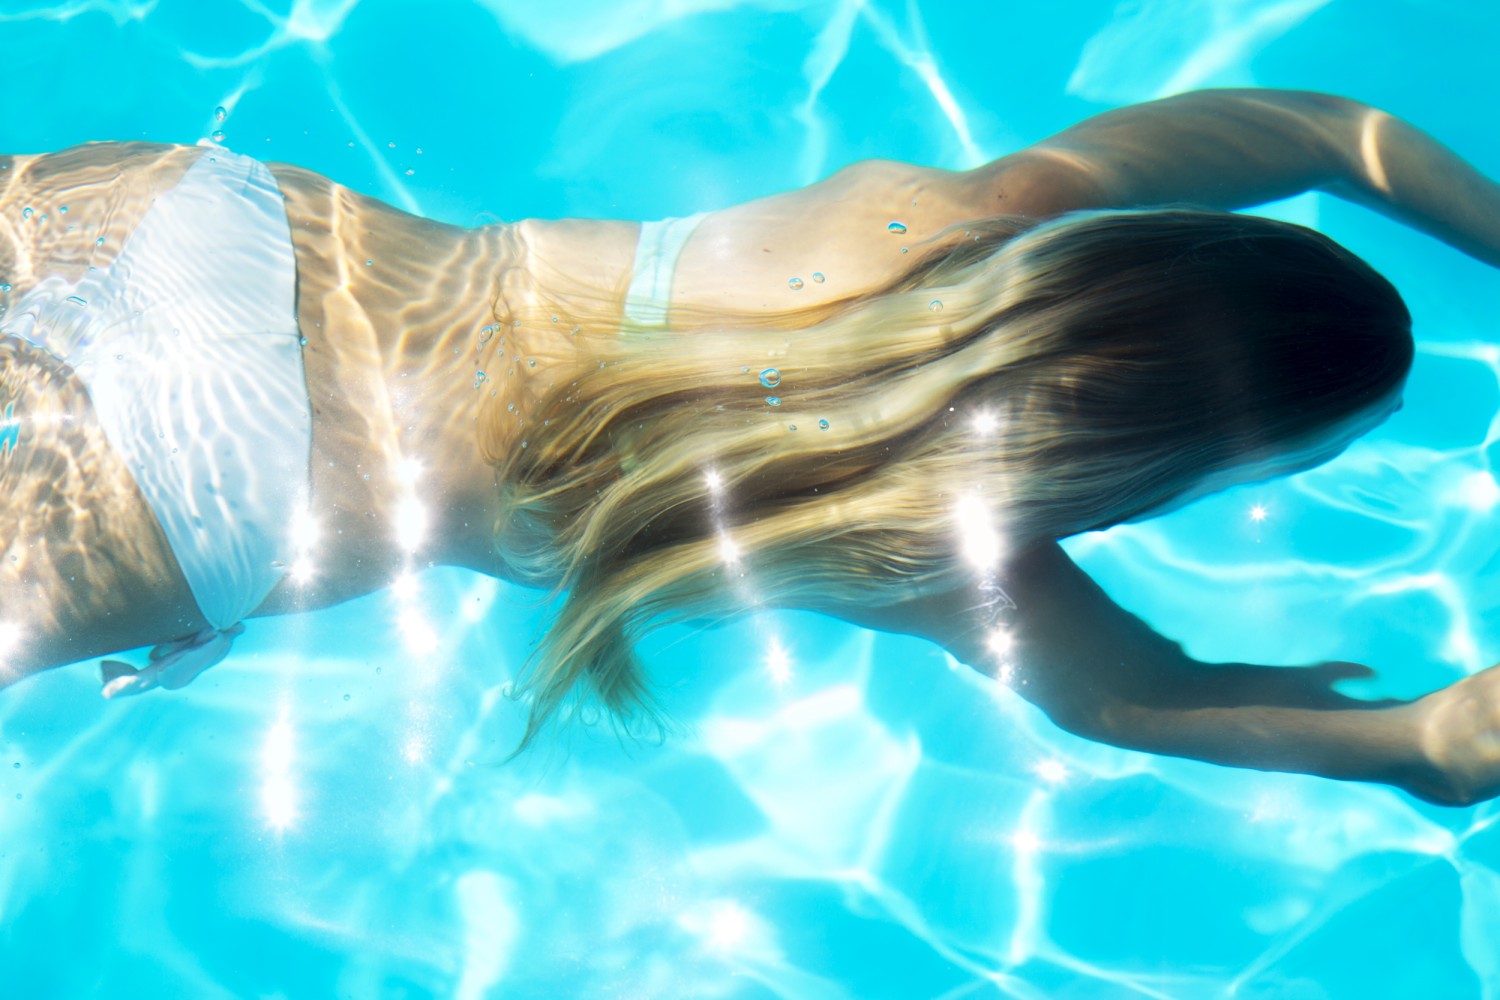 Sweating, chafing, chlorine: Solutions to summer's biggest hair